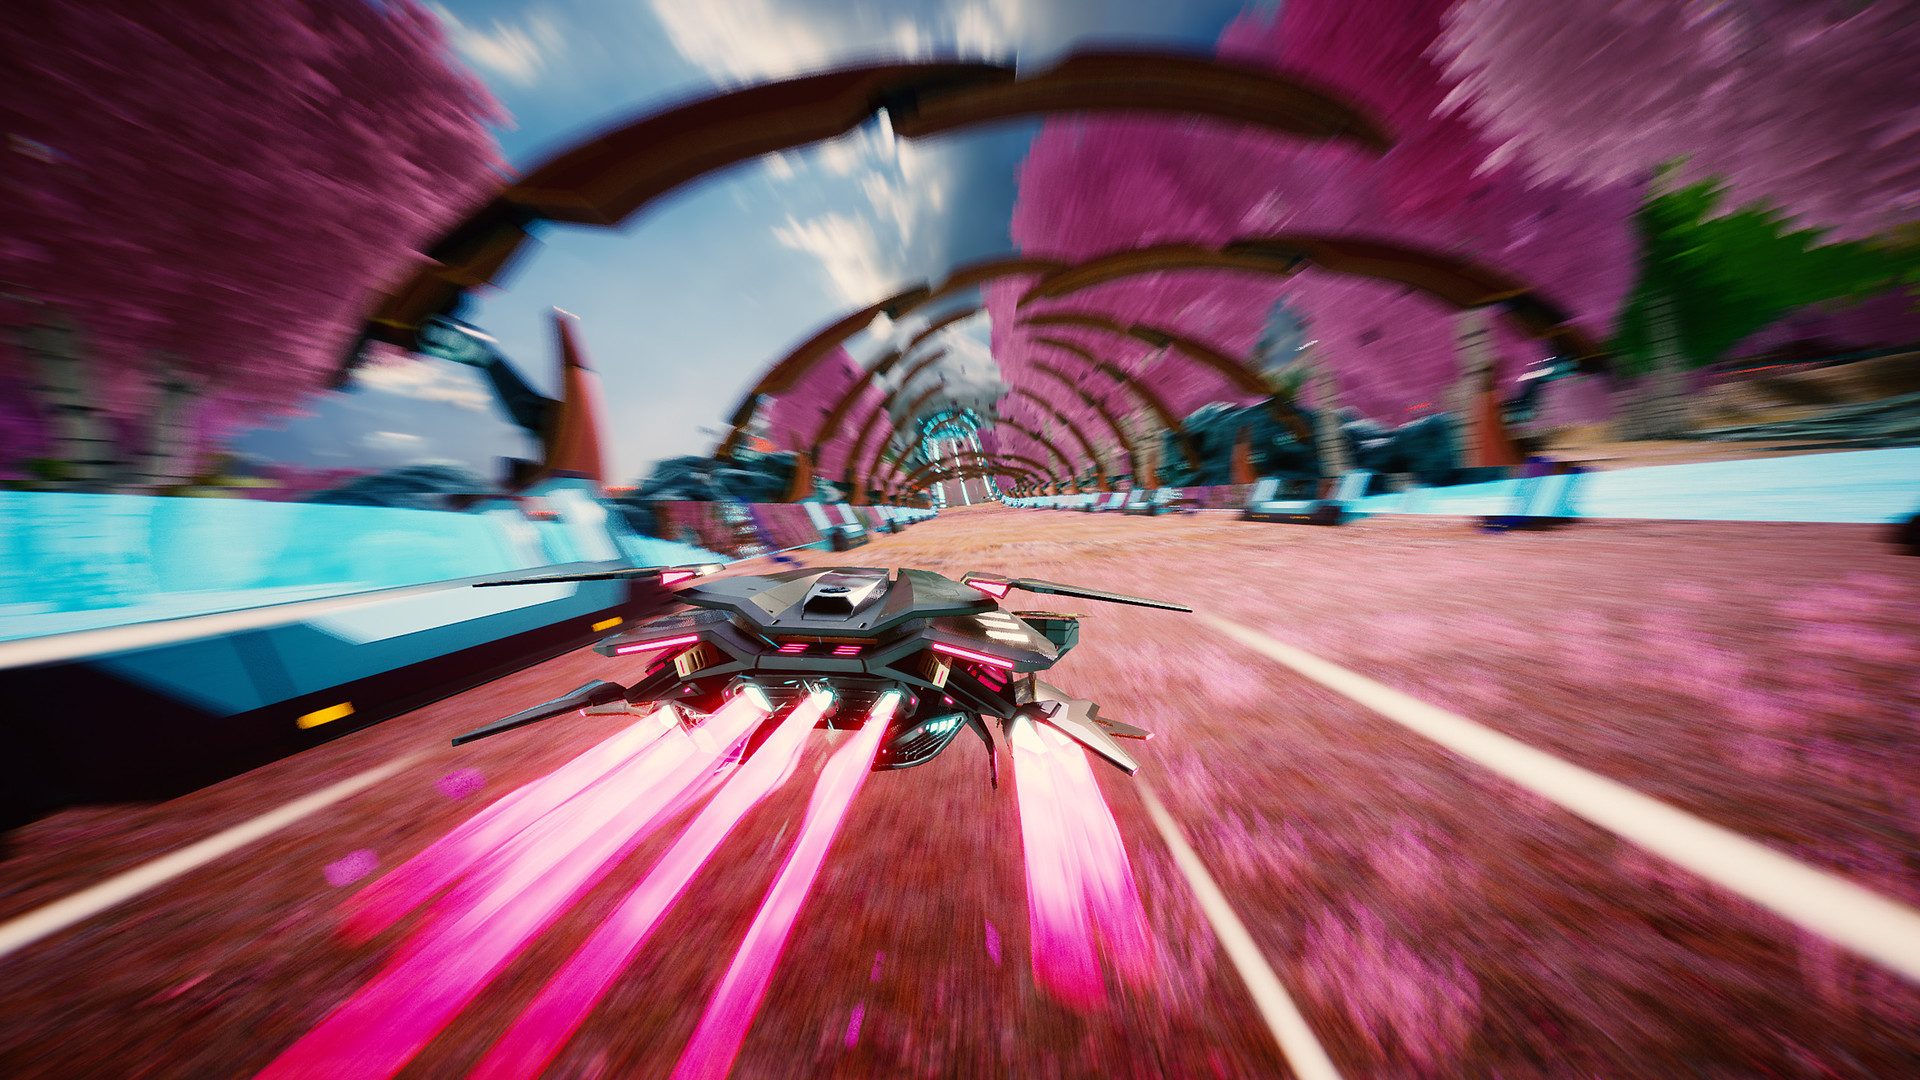 Redout 2 - Deluxe Edition